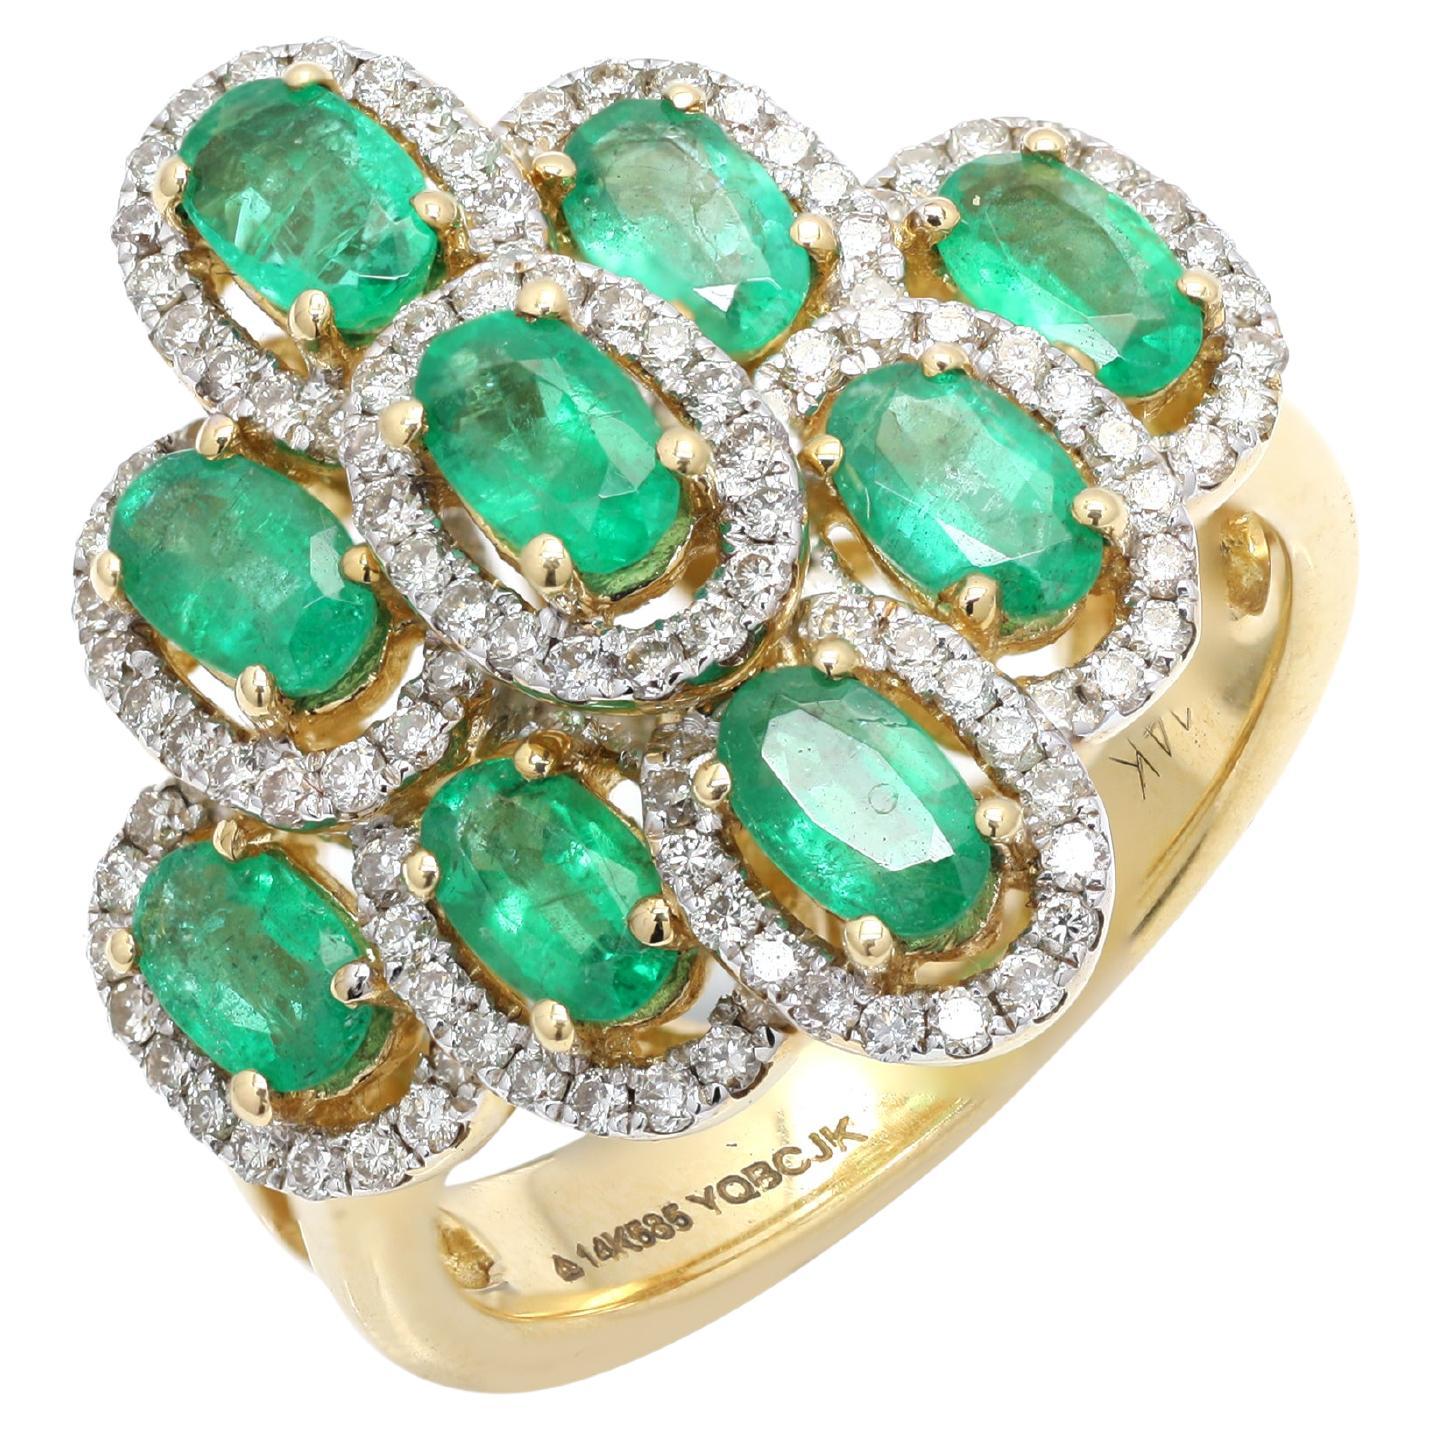 For Sale:  Estate 14k Yellow Gold 2.25 Carat Diamond Emerald Ring Cluster Cocktail Ring